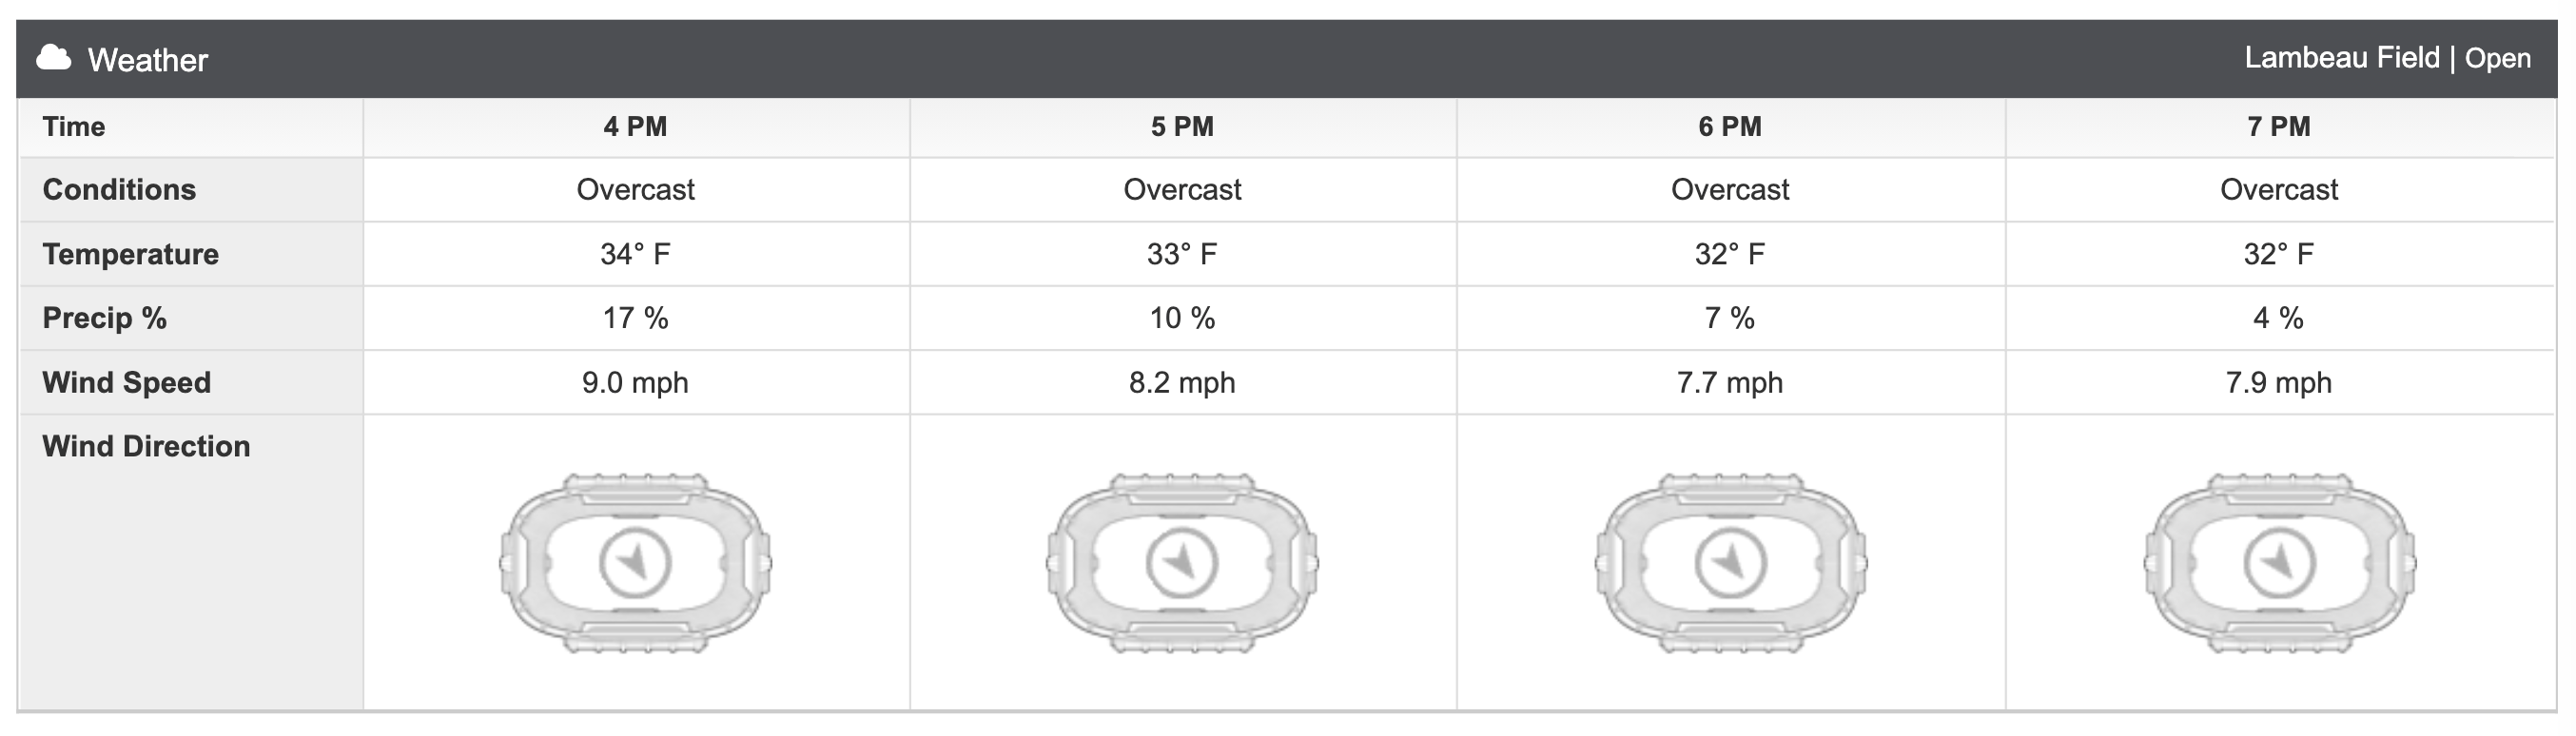 Green Bay Weather Forecast: Some Wind Expected for Rams vs. Packers at Lambeau Field Saturday